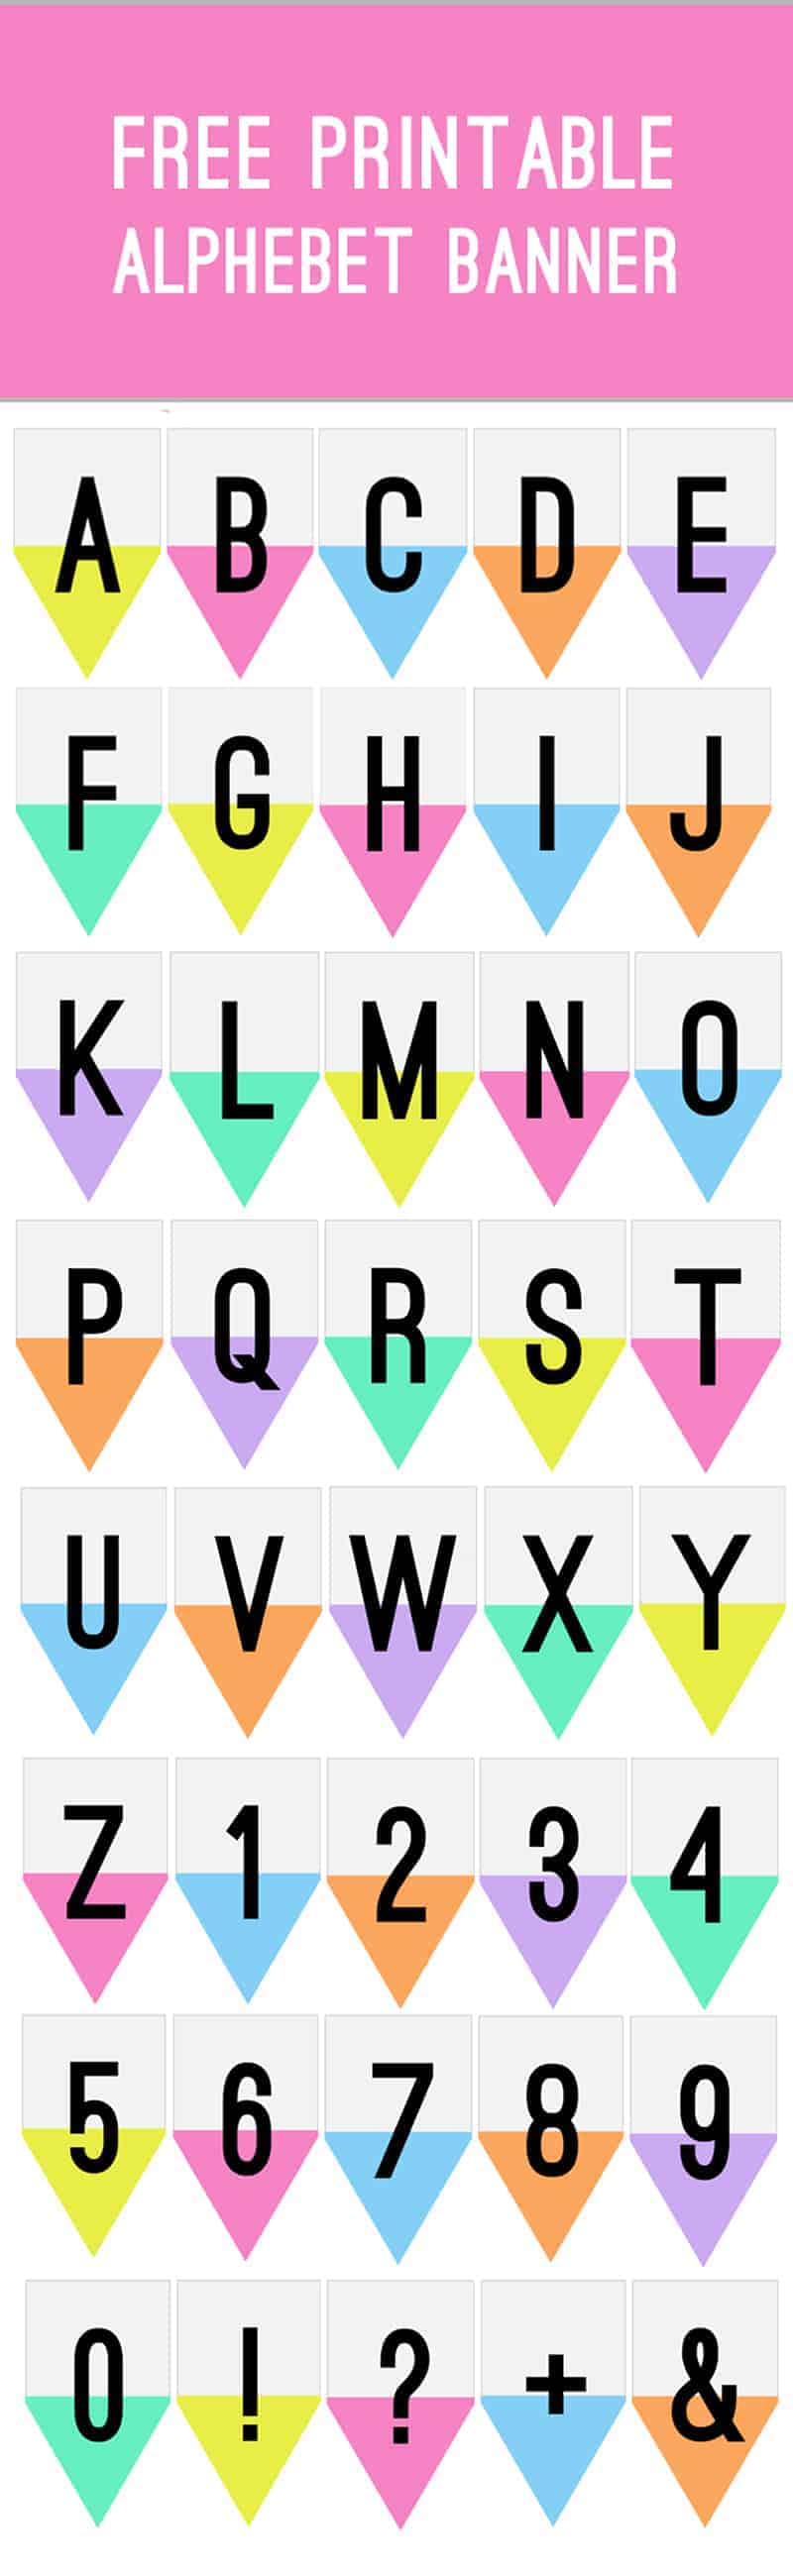 printable-letters-for-banner